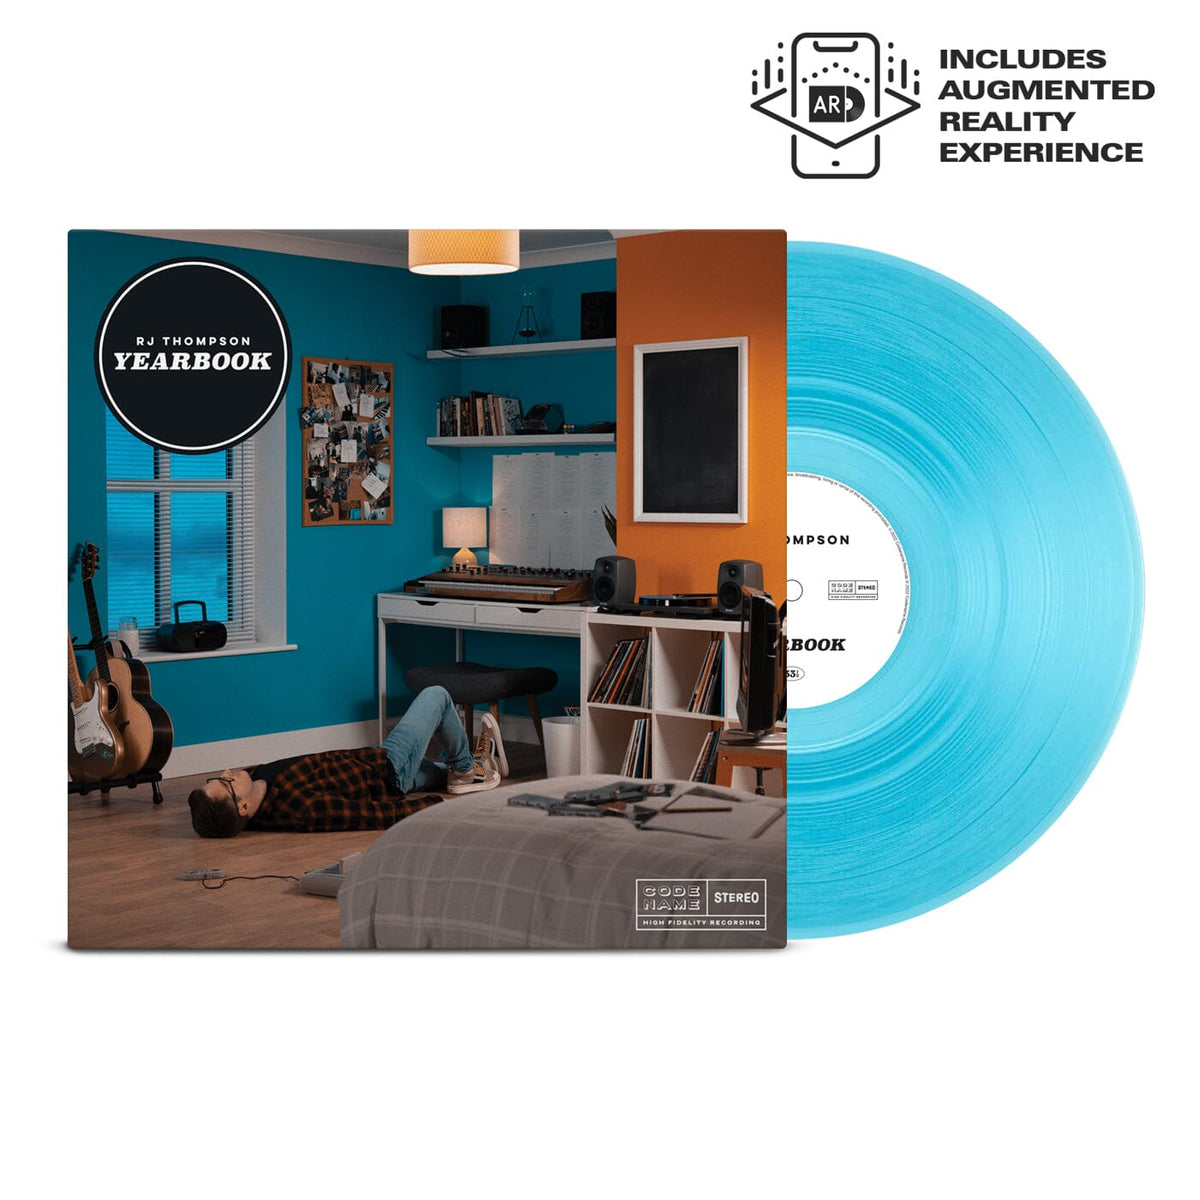 Yearbook - Limited Edition 12" Transparent Curaçao Blue Vinyl | RJ Thompson | Official Website & Store